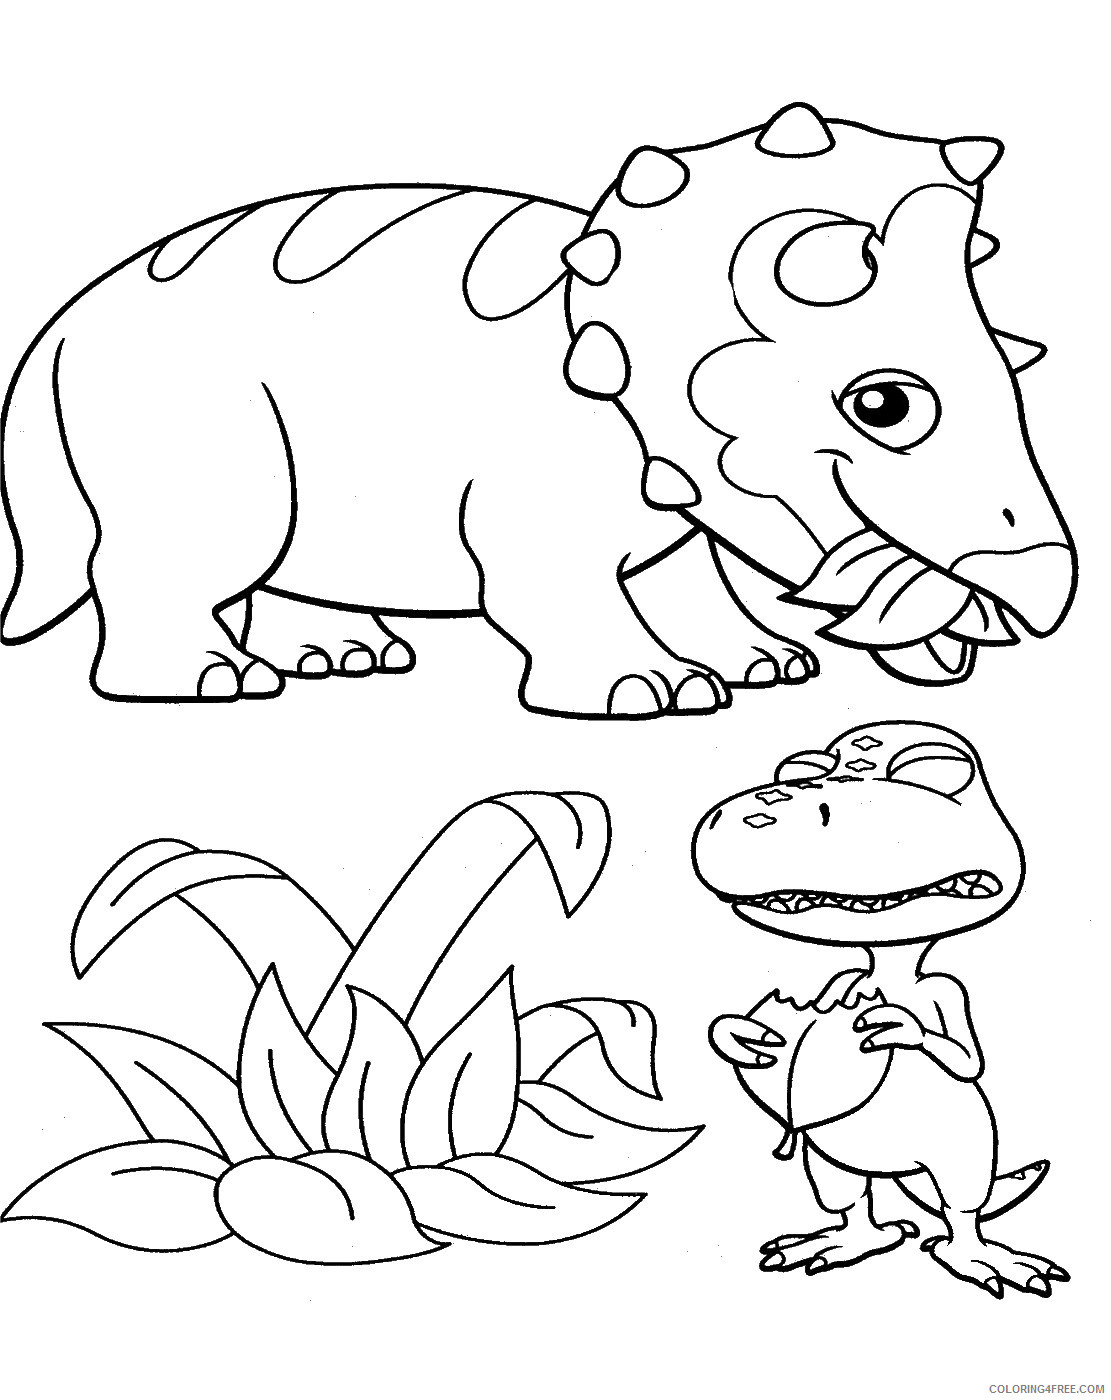 Dinosaur Train Coloring Pages Cartoons dino_train_cl_11 Printable 2020 2232 Coloring4free